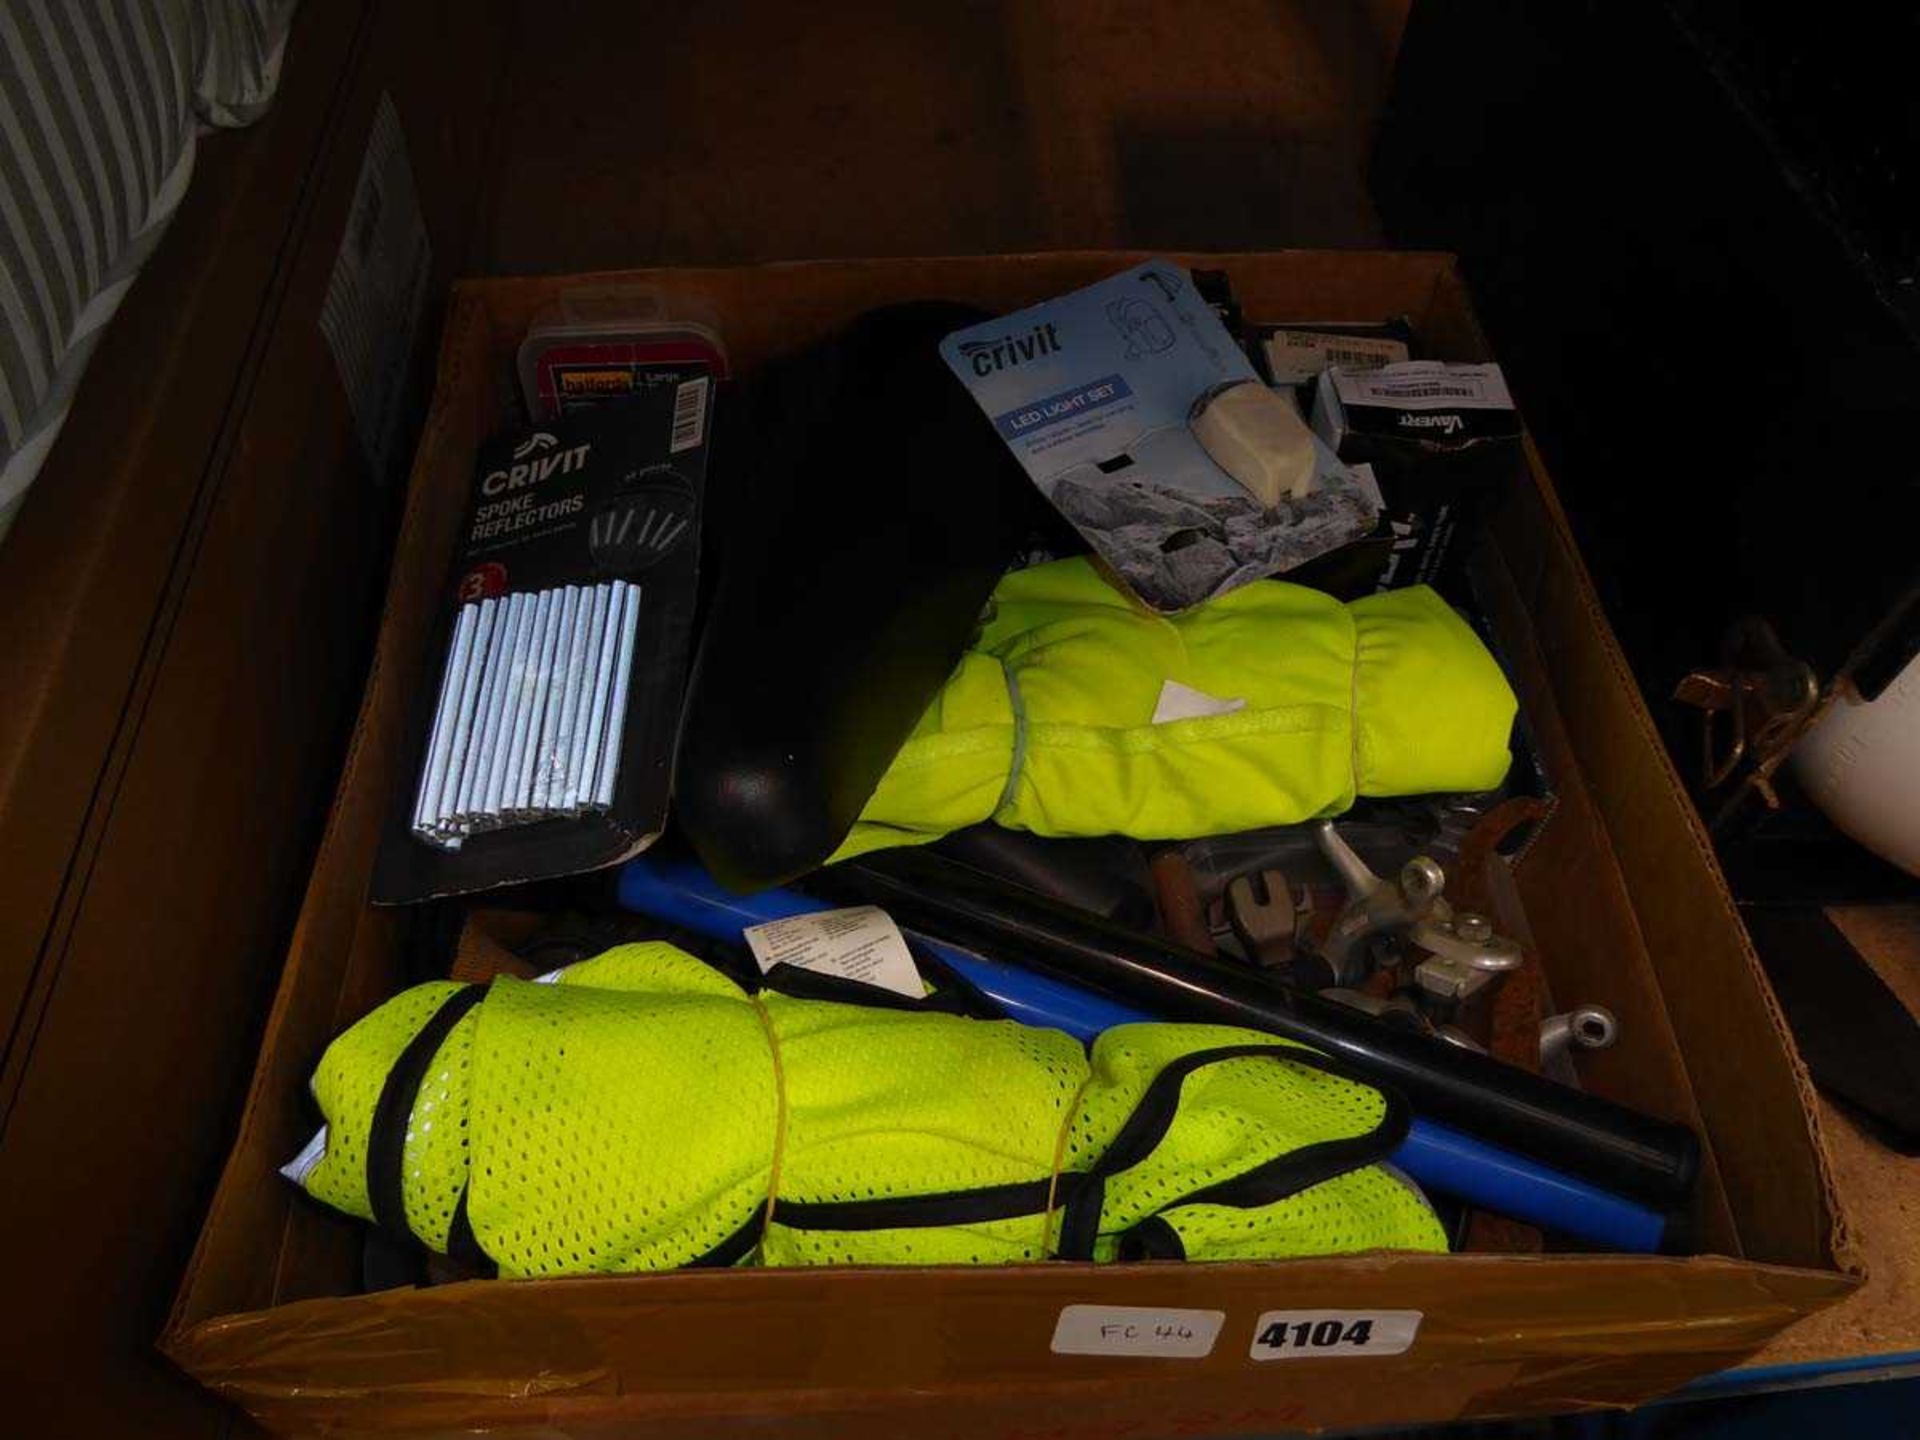 Box of bike parts including seats, inner tubes, pumps etc